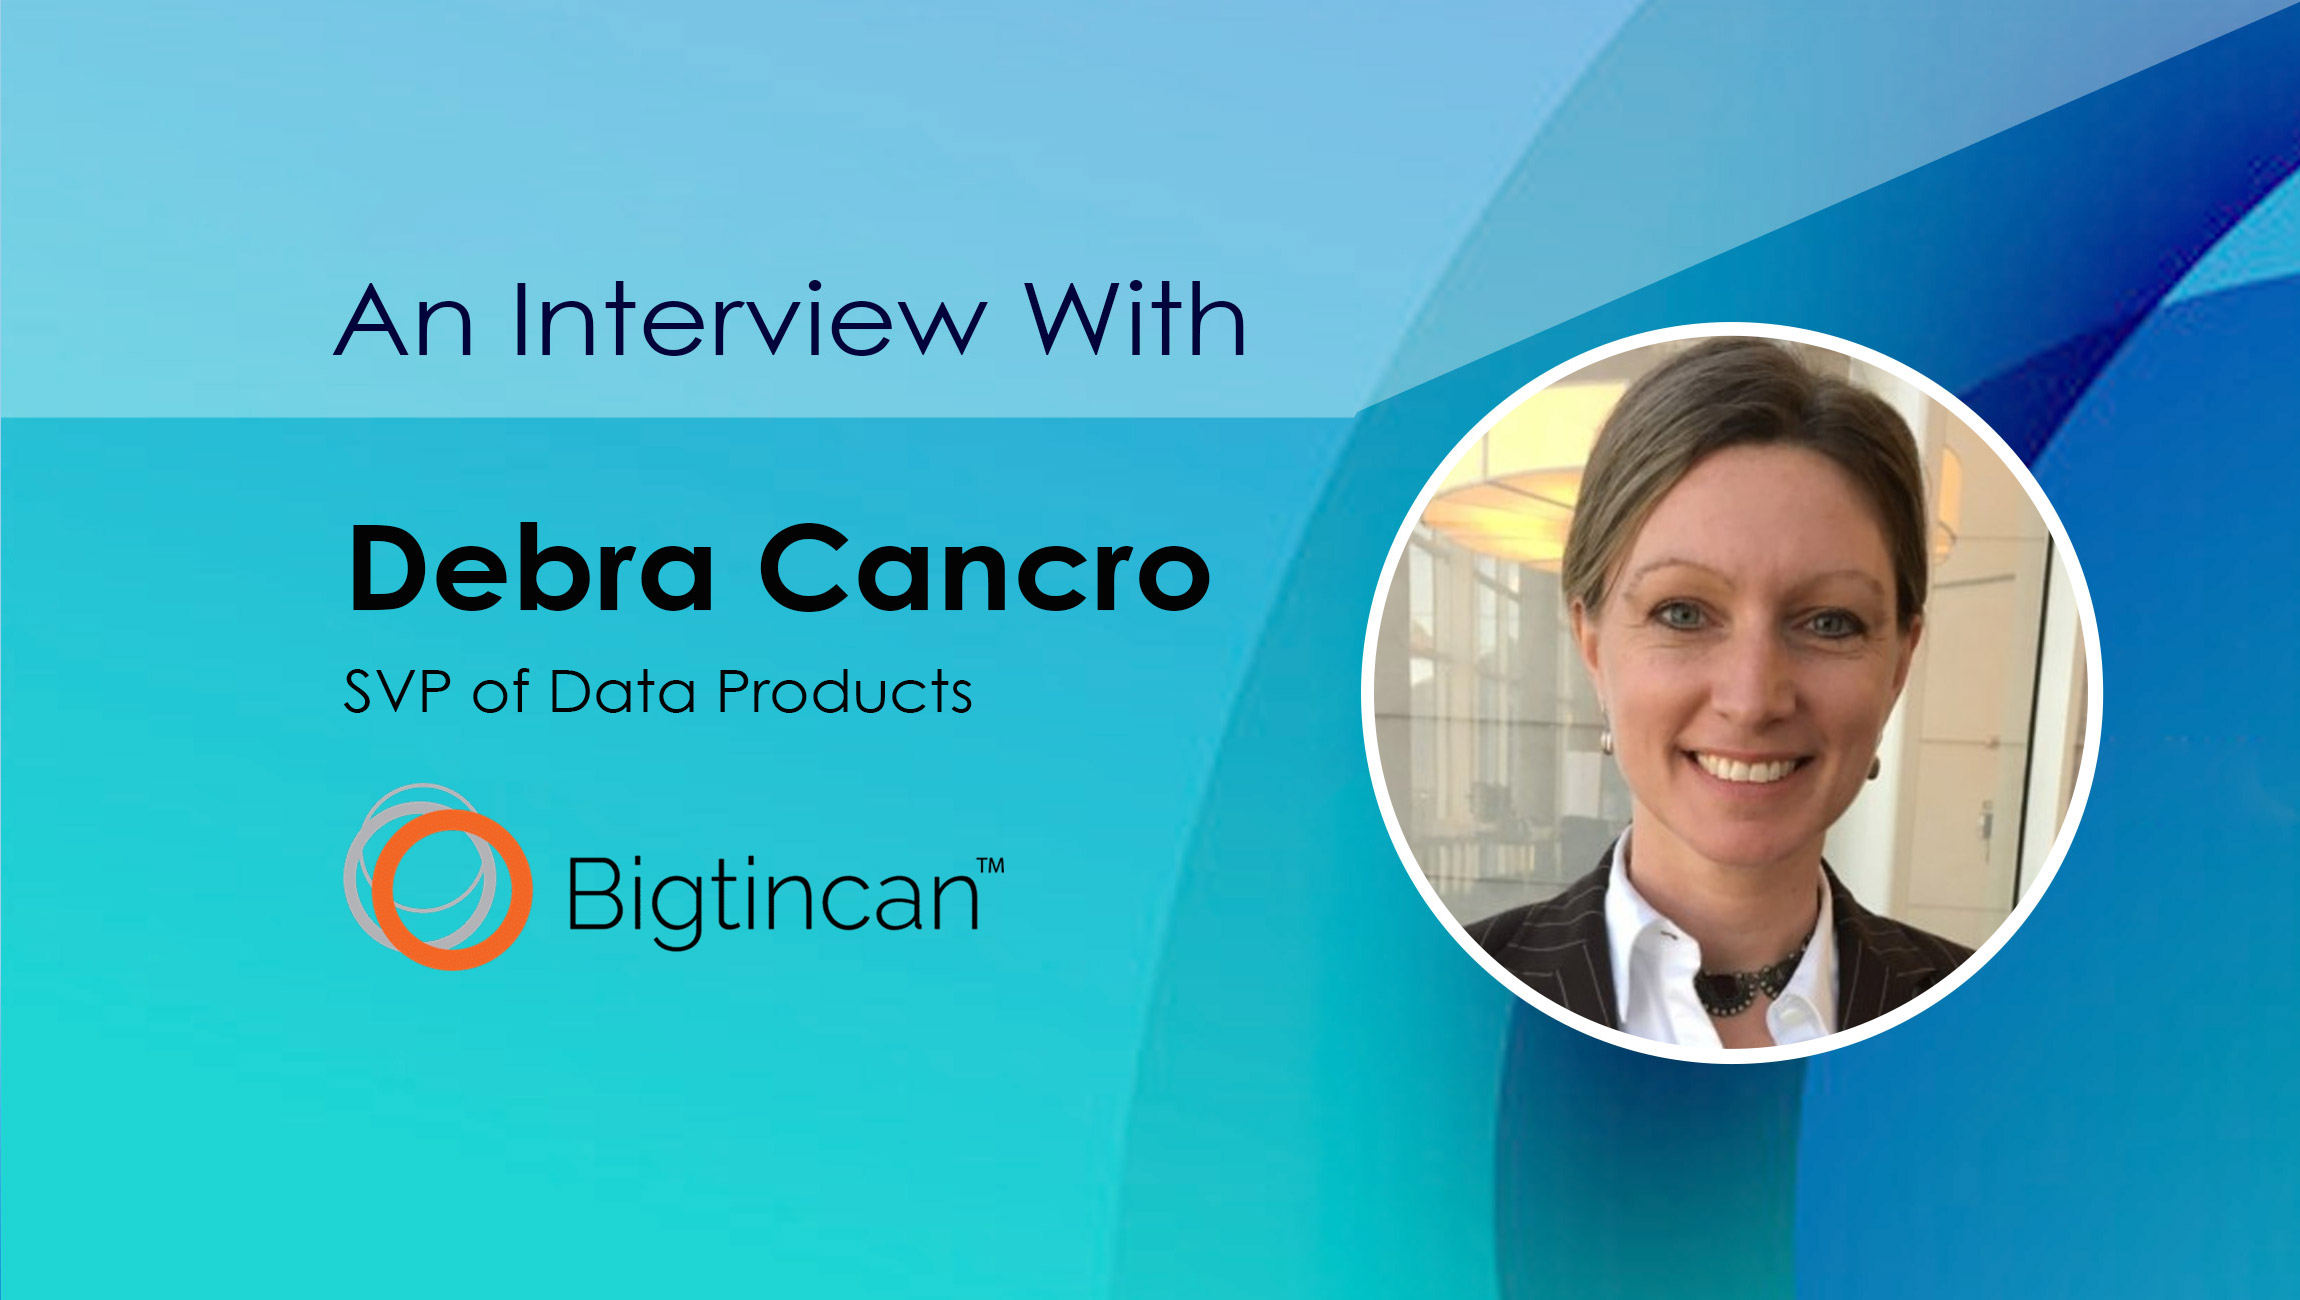 SalesTechStar Interview with Debra Cancro, SVP of Data Products at Bigtincan